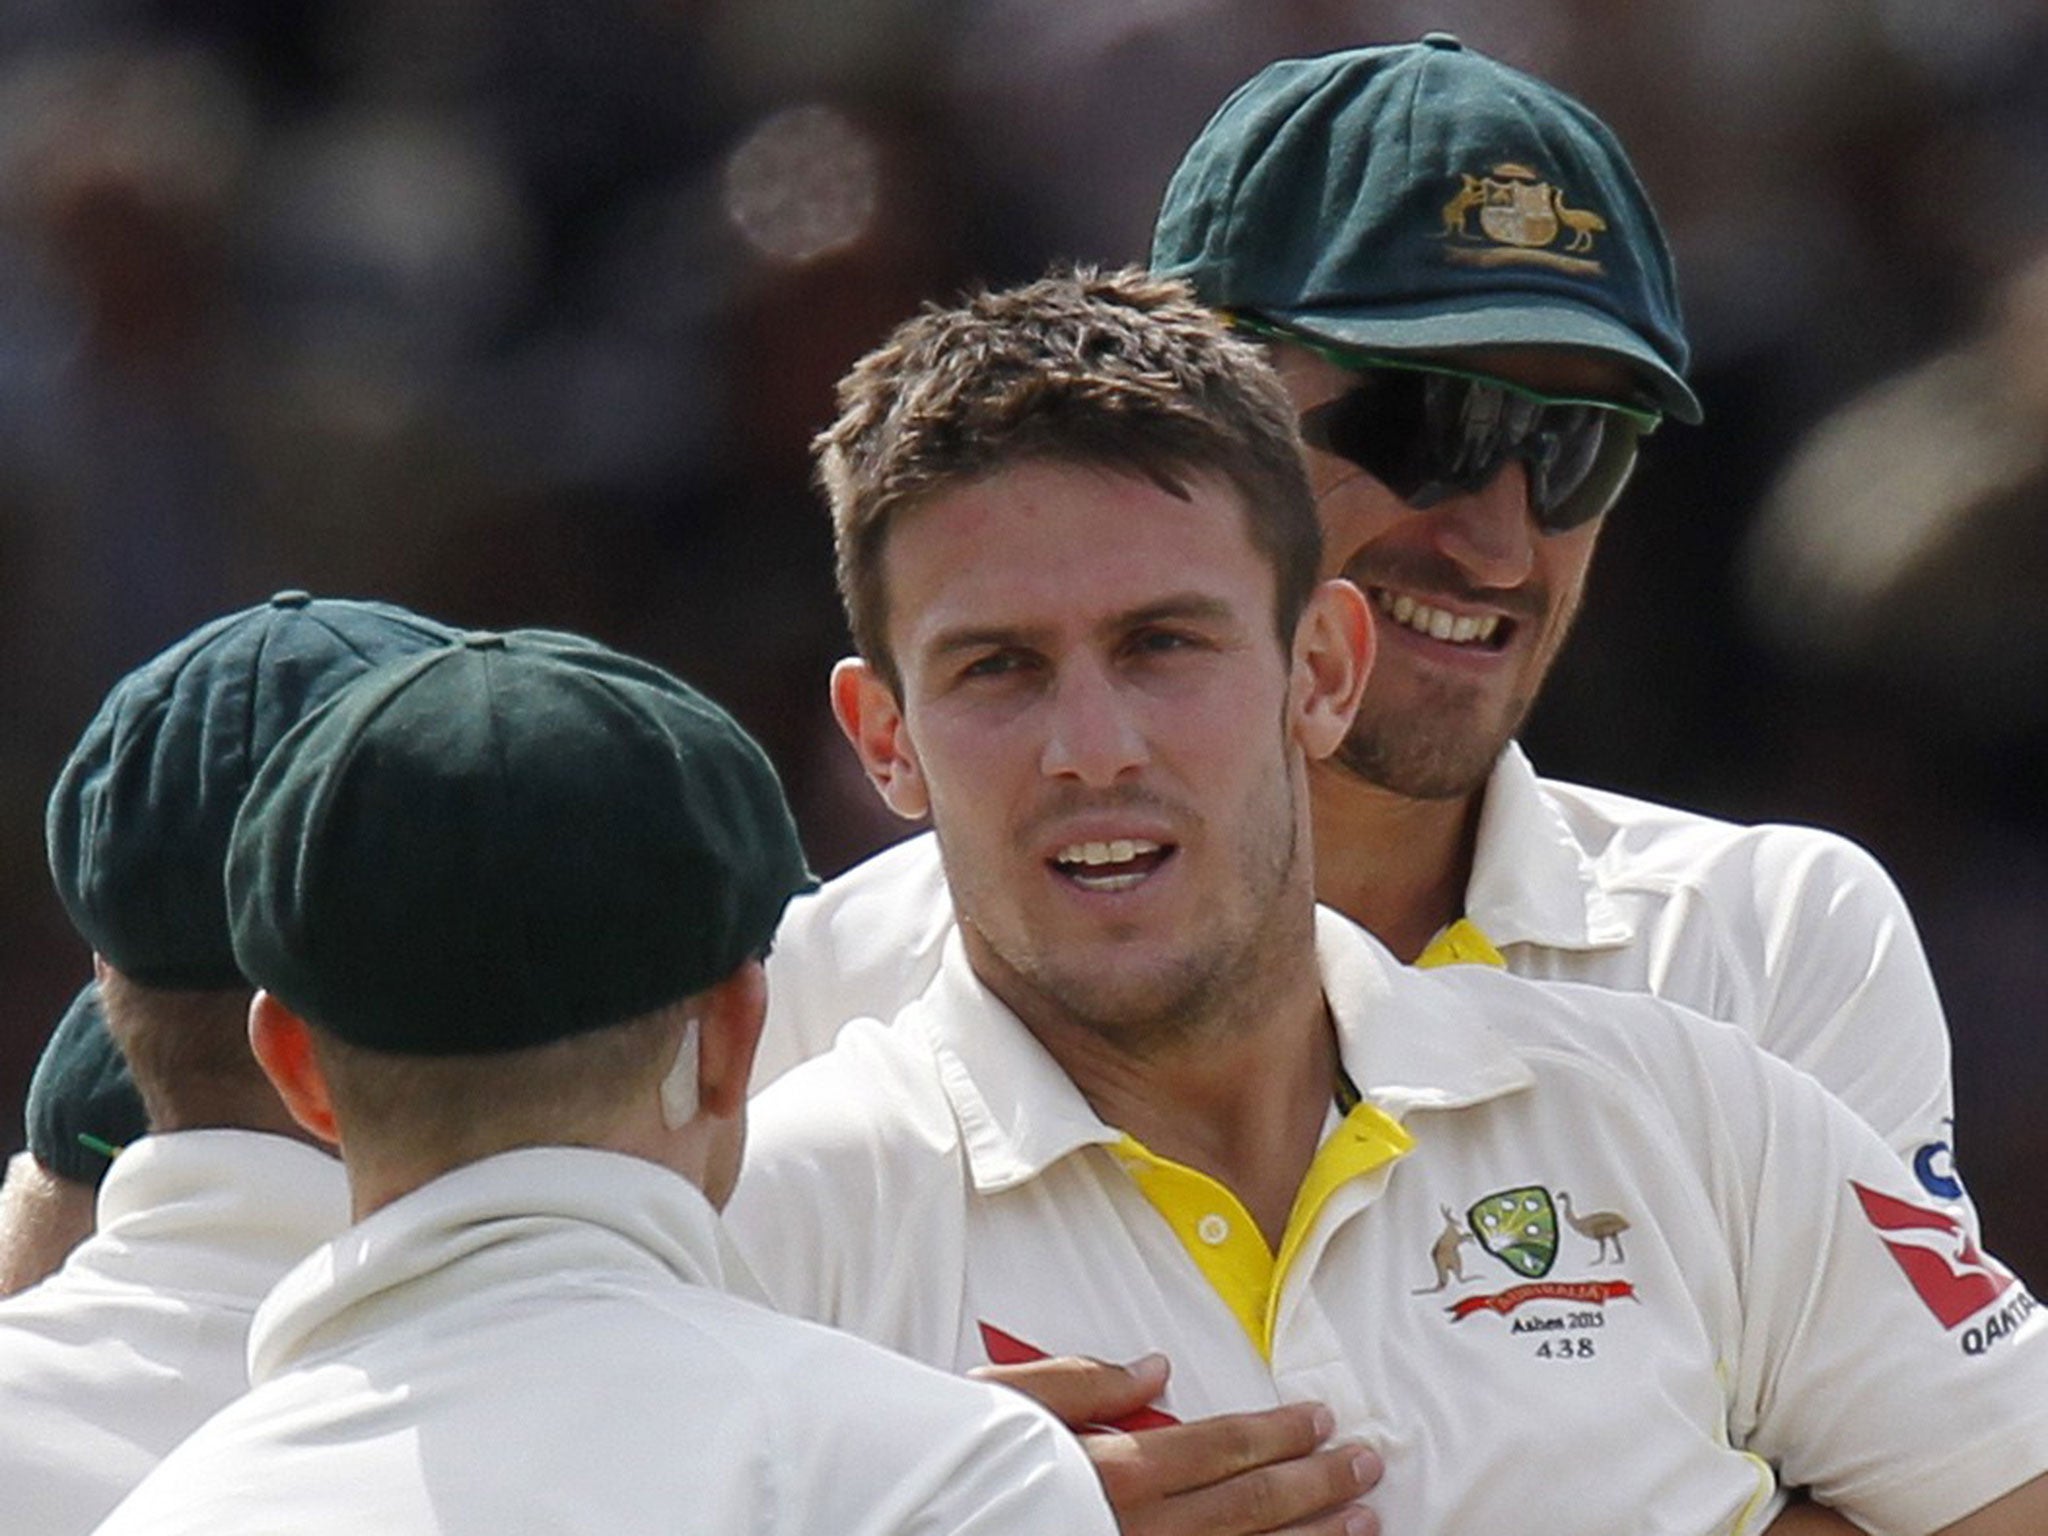 Mitchell Marsh bowled fast, took some key wickets and chipped in with runs